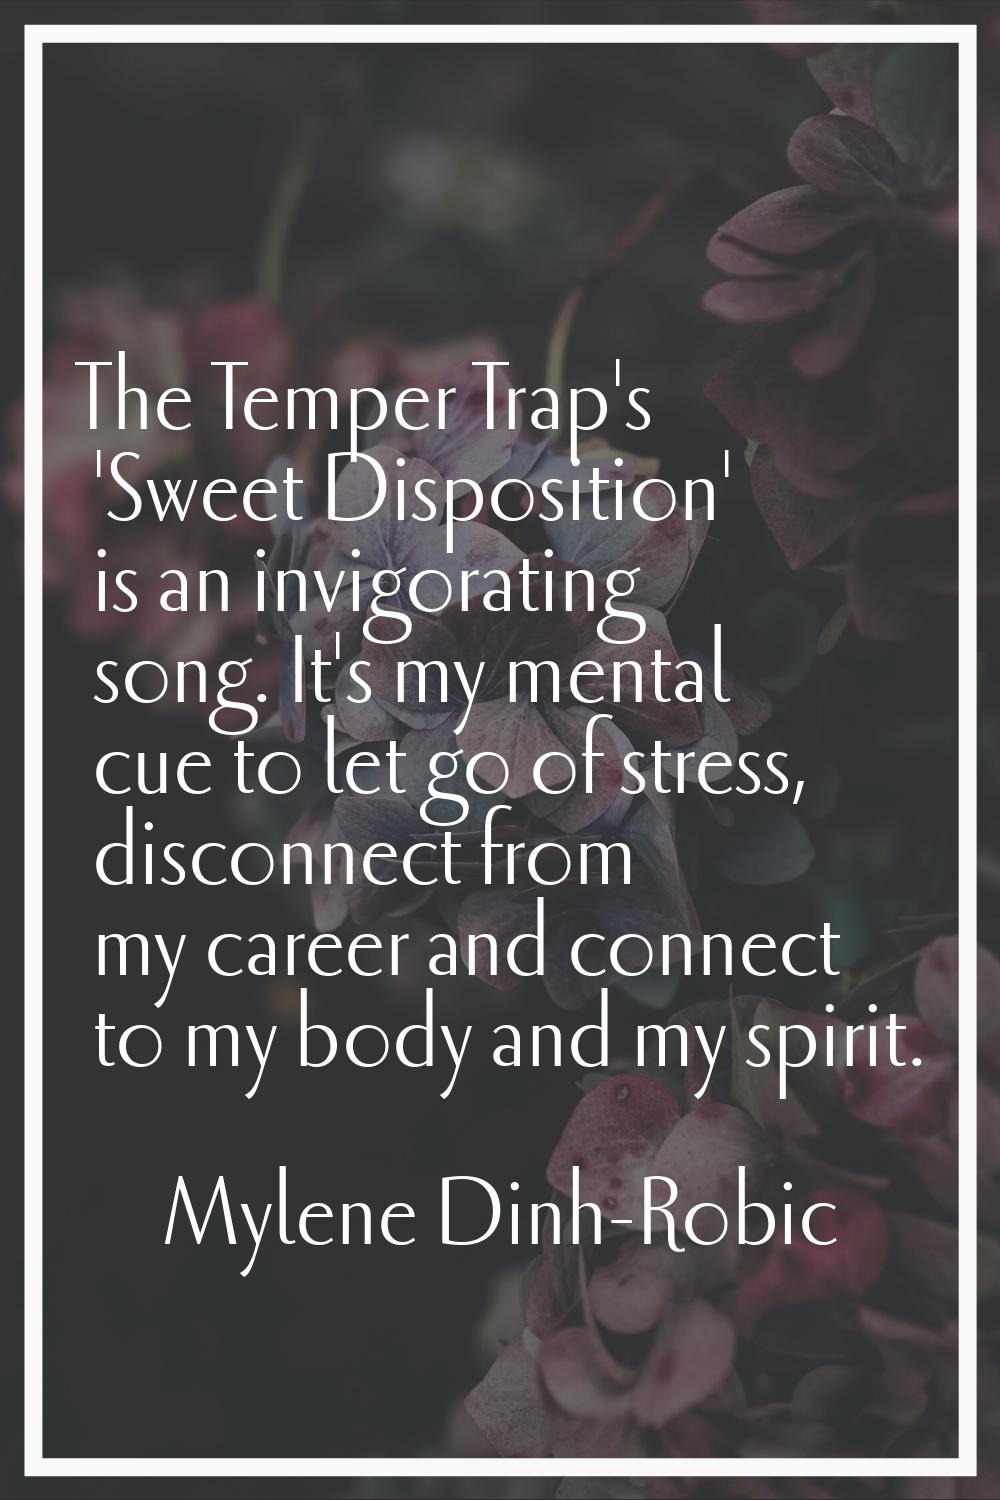 The Temper Trap's 'Sweet Disposition' is an invigorating song. It's my mental cue to let go of stre